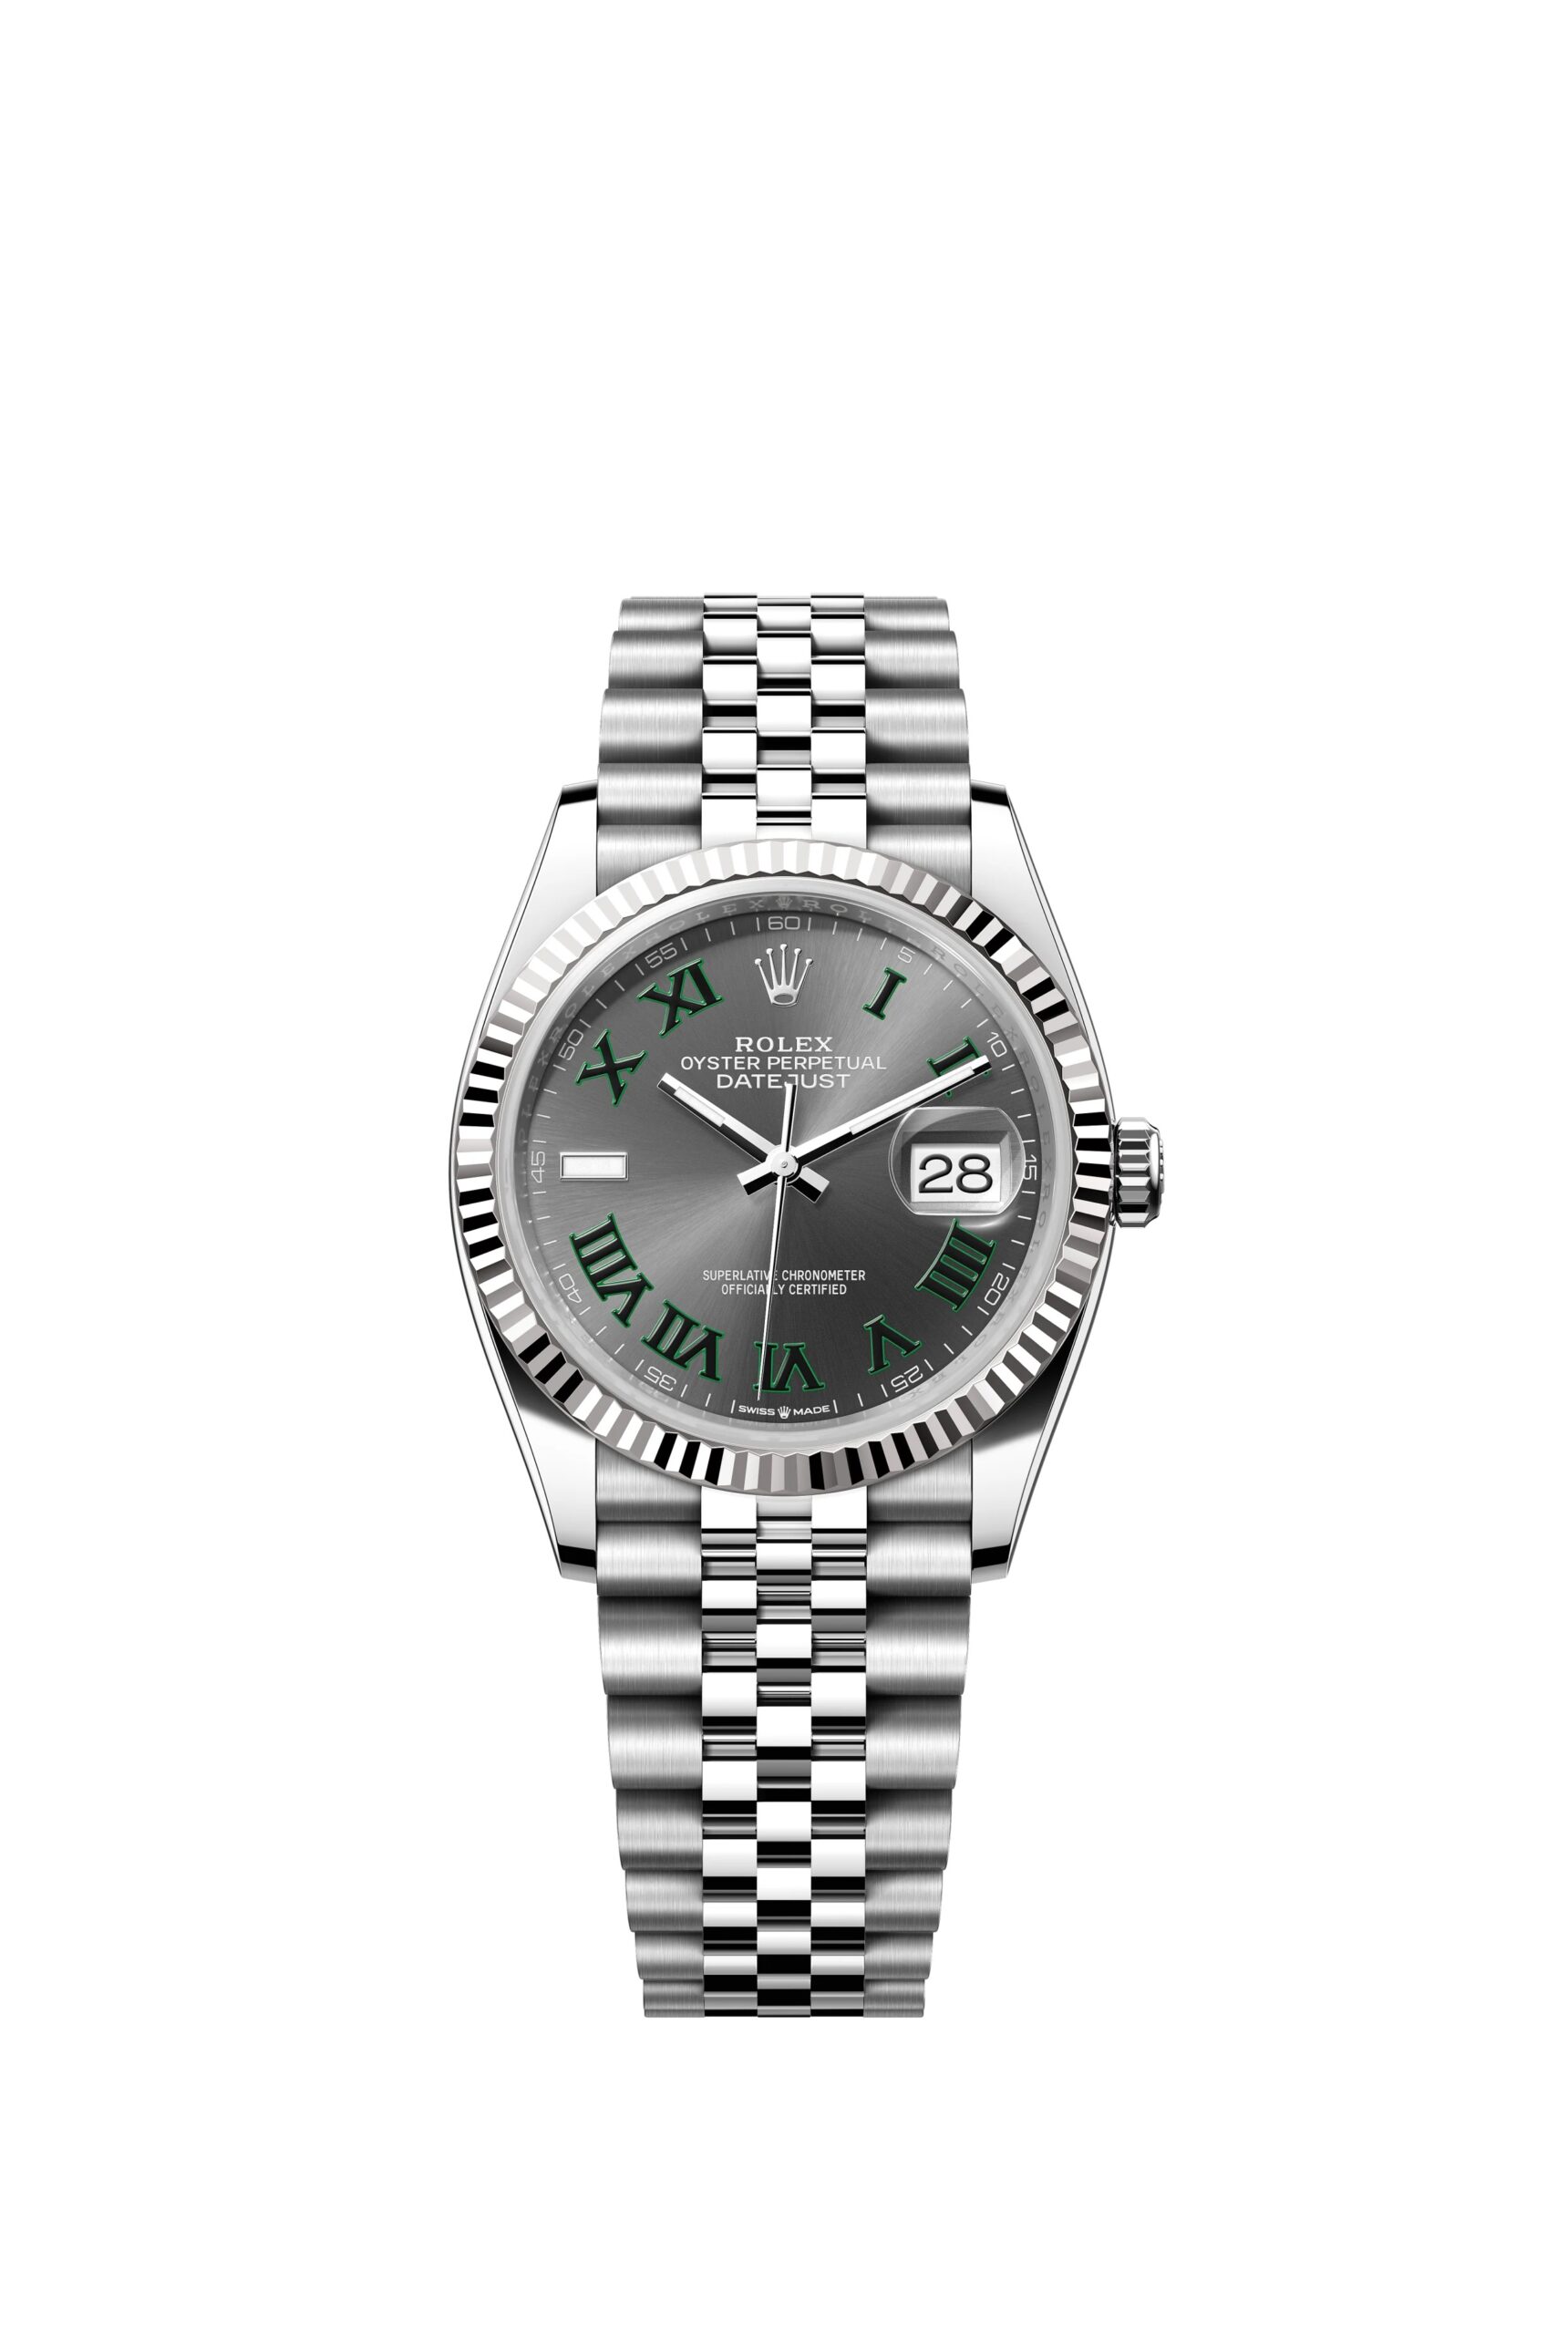 Rolex Datejust 36 Oyster, 36 mm, Oystersteel and white gold Reference 126234